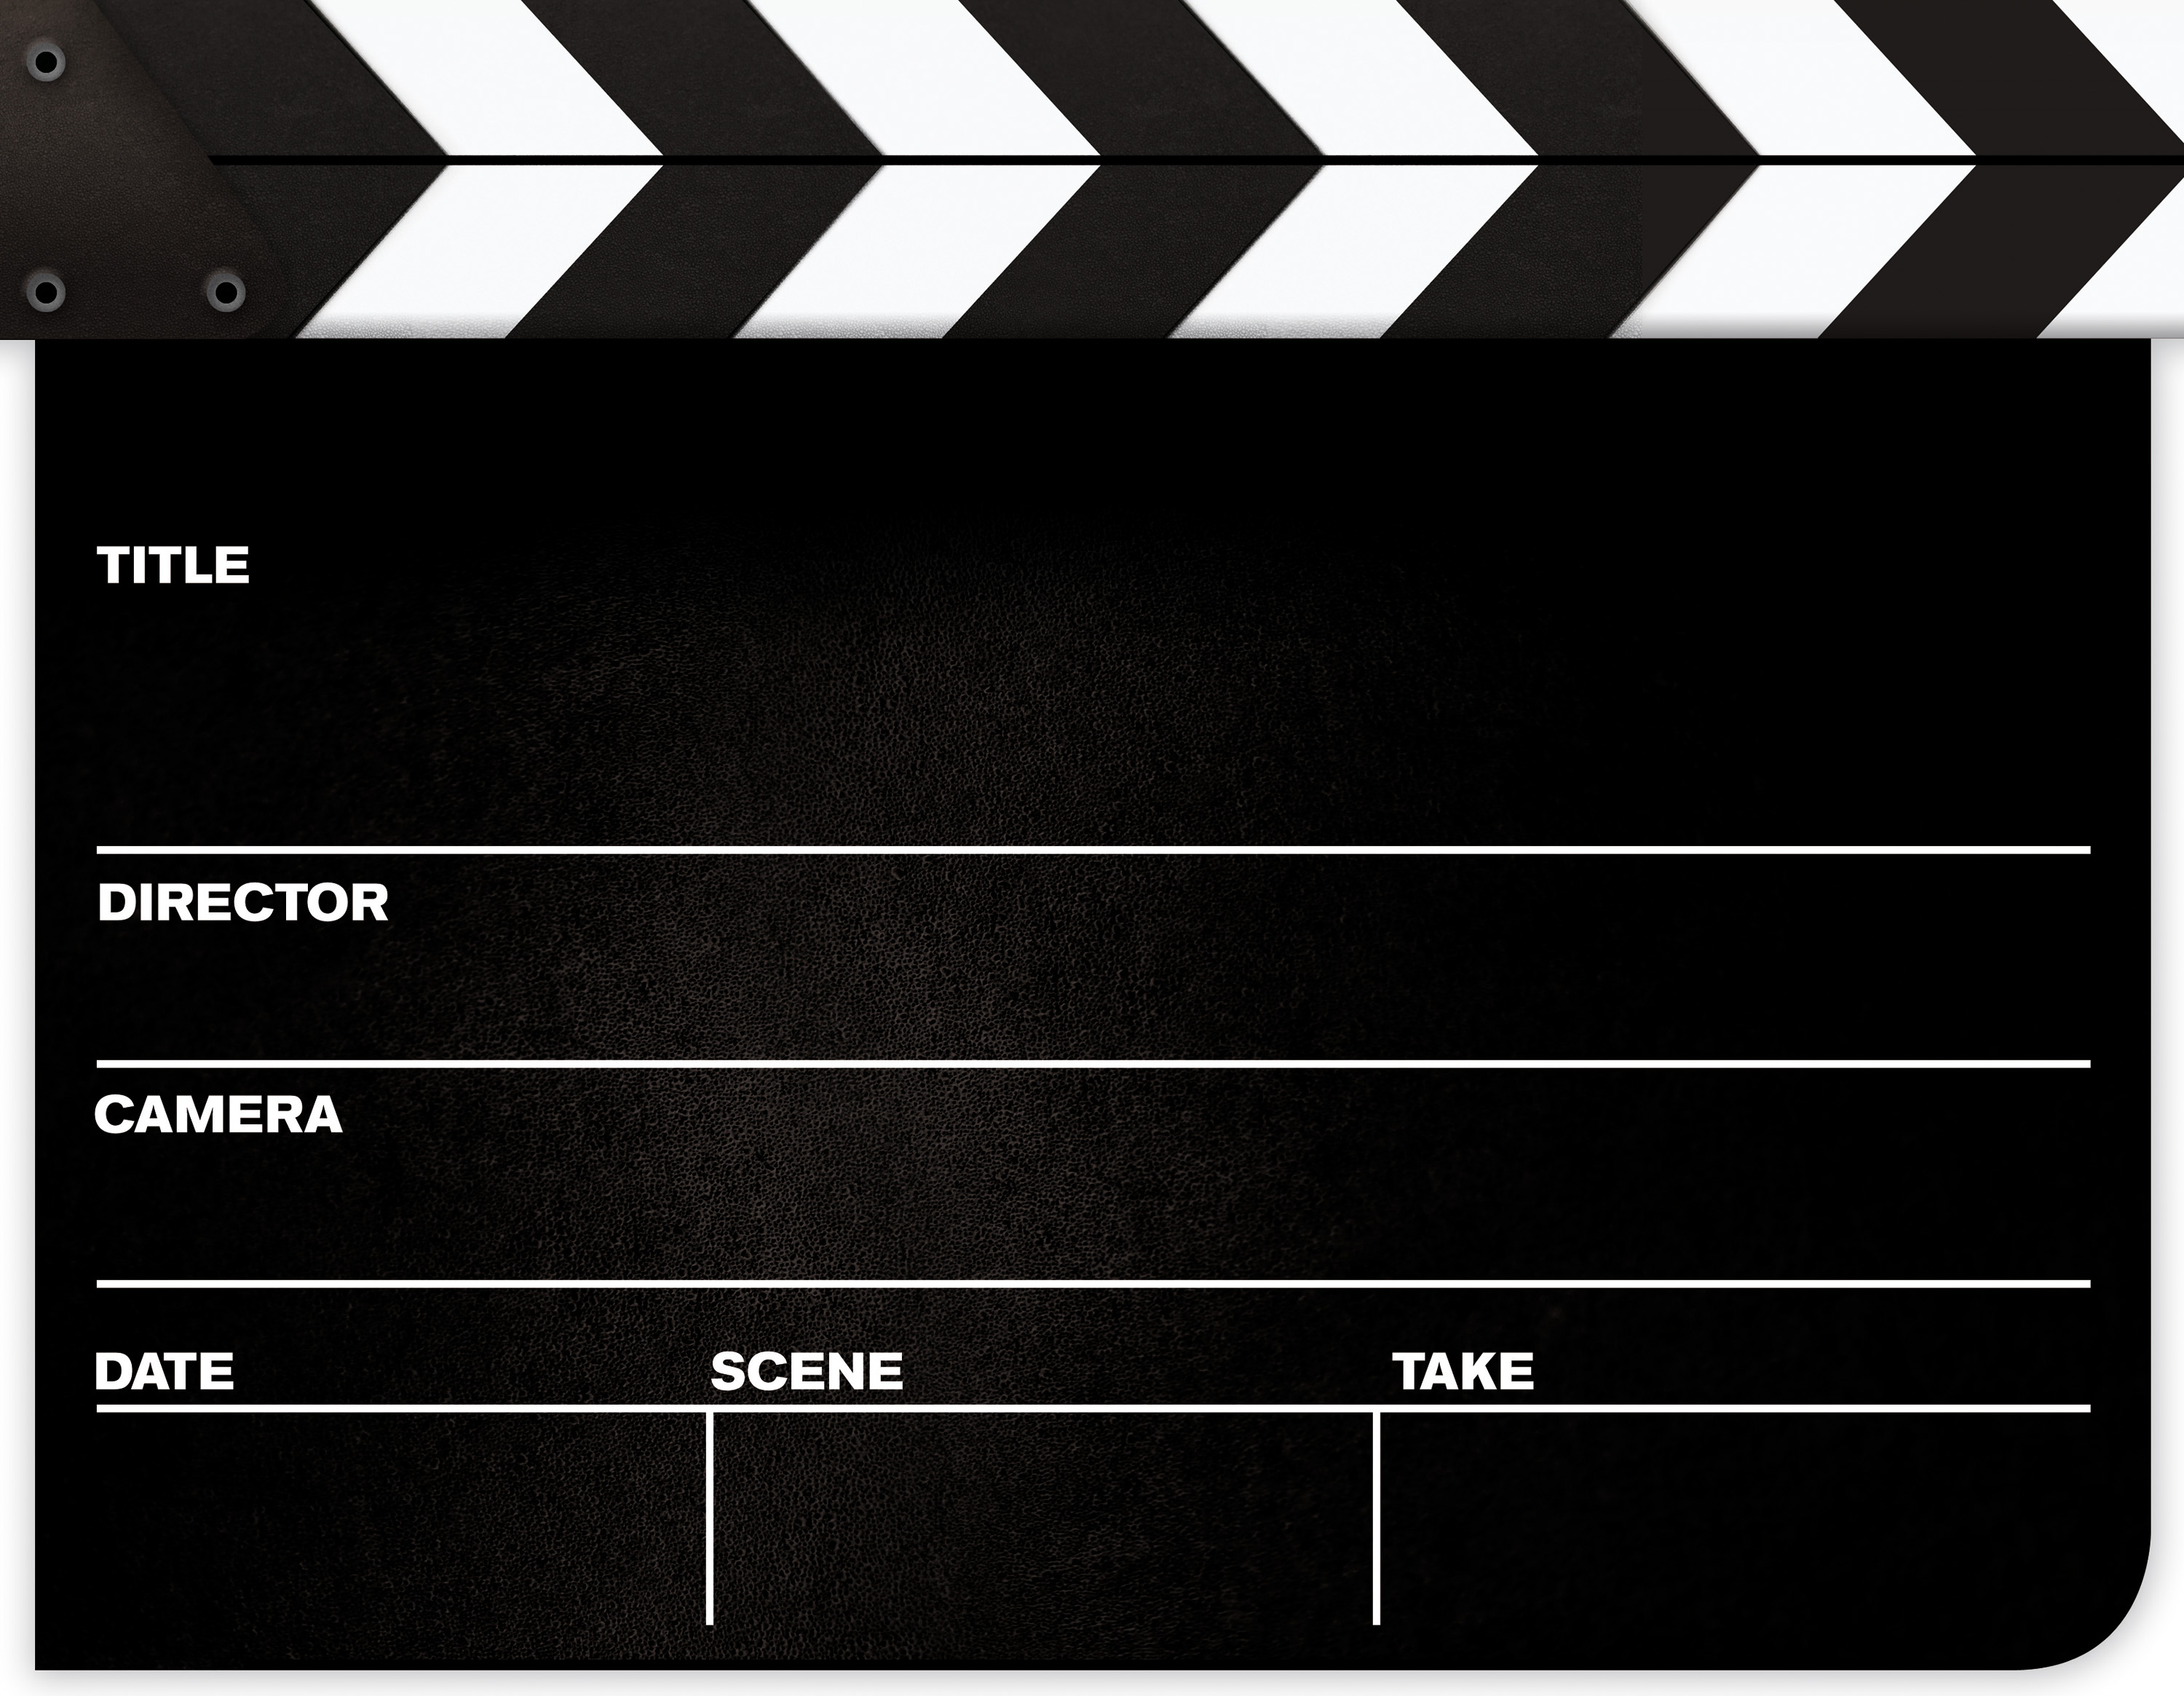 Image of clapboard clipart 6 movie reel clip art clipartoons